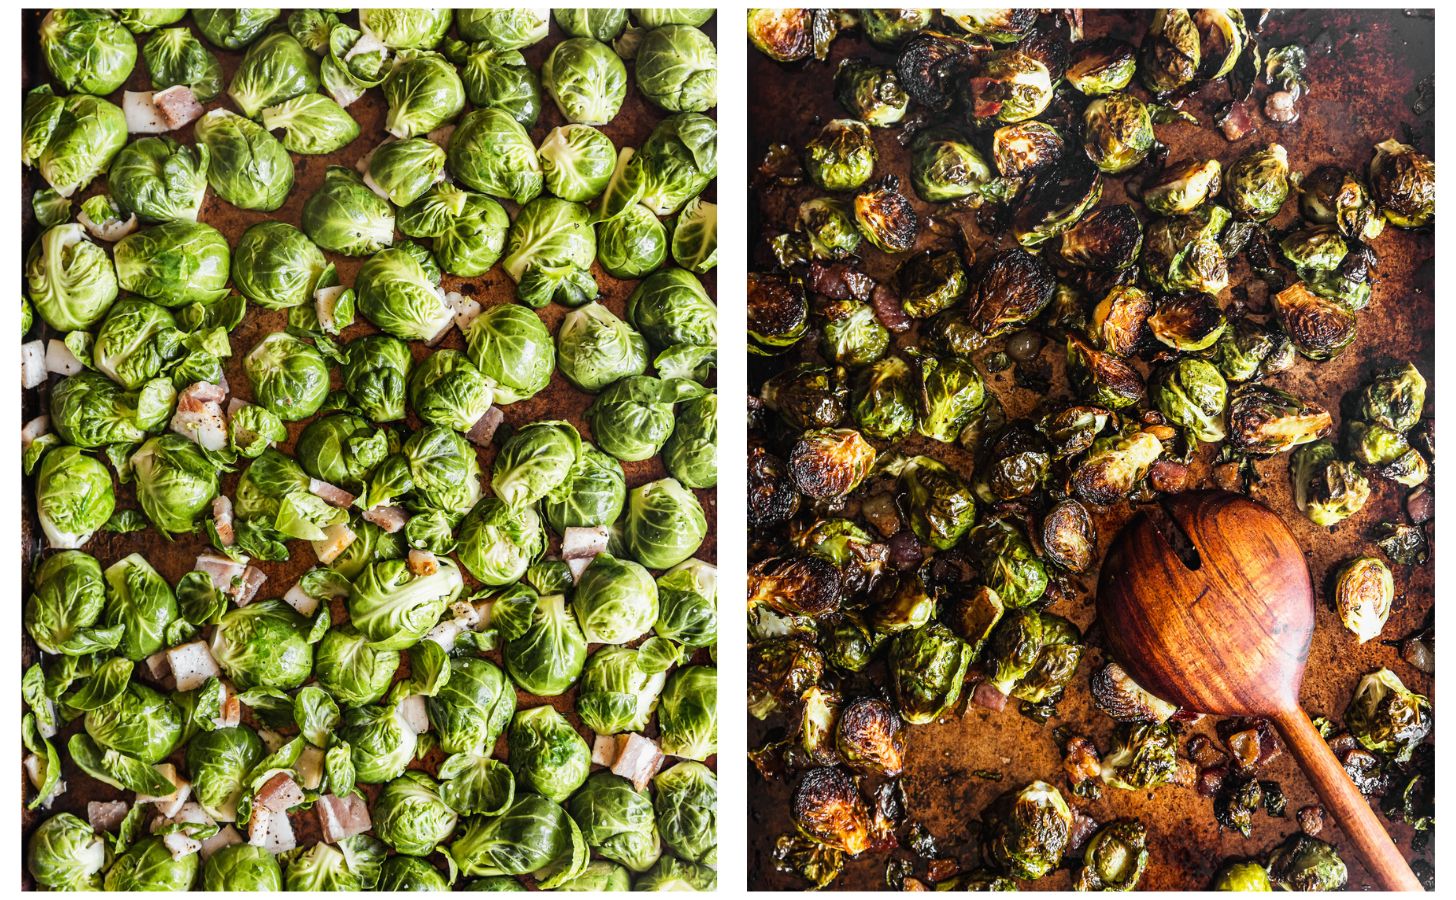 Two steps to making charred veggies. In photo 1, raw sprouts and bacon on a gold sheet pan. In photo 2, a wood spoon is mixing the cooked sprouts with vinaigrette.